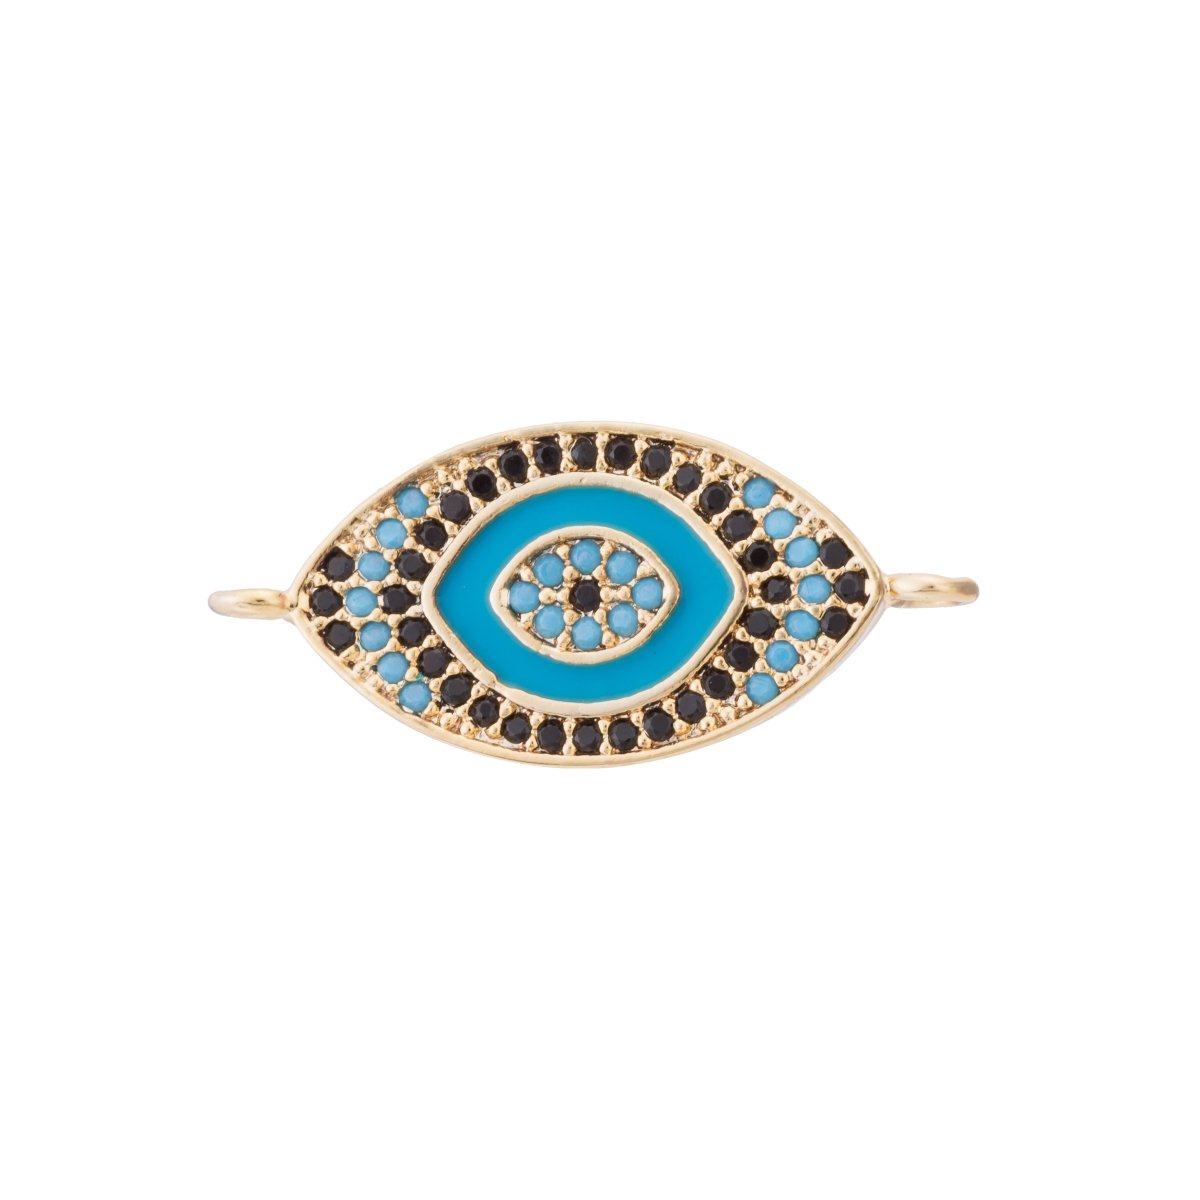 Turquoise Evil Eye, Lucky Charm, Charm CONNECTOR, Women Cubic Zirconia Bracelet Charm Bead Finding For Jewelry Making | F-114 - DLUXCA